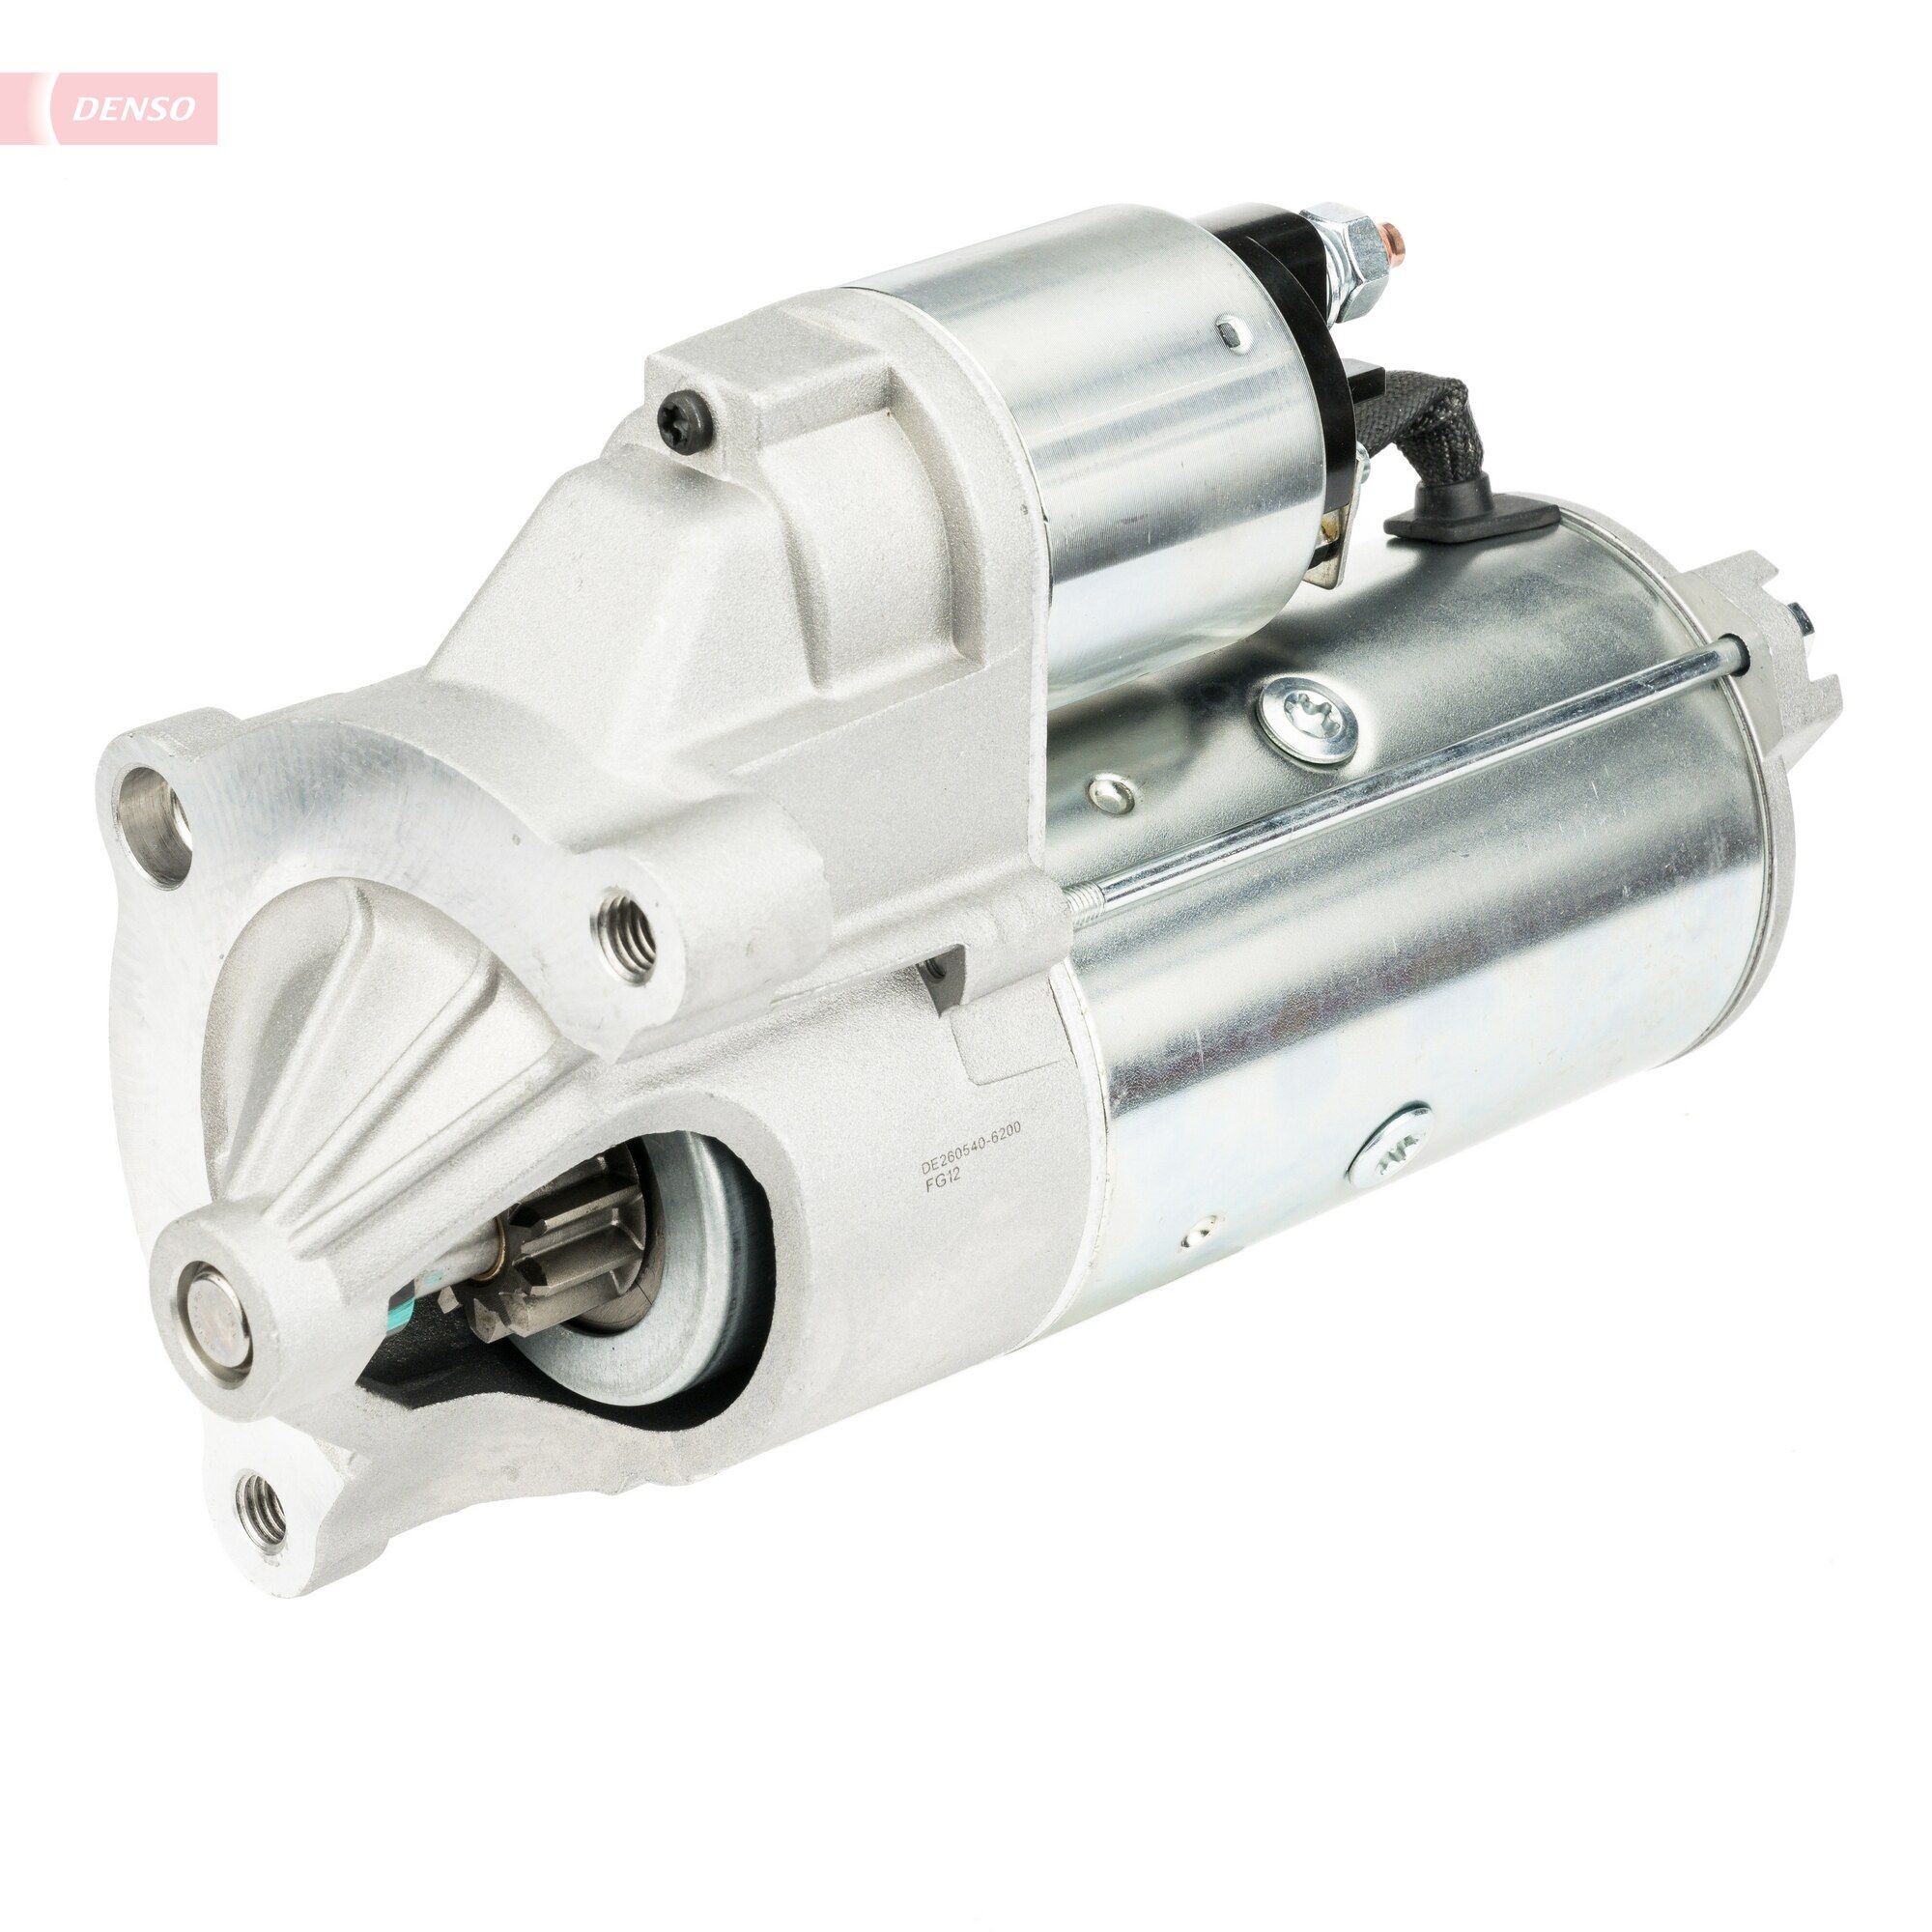 DENSO DSN3040 Starter motor PEUGEOT experience and price